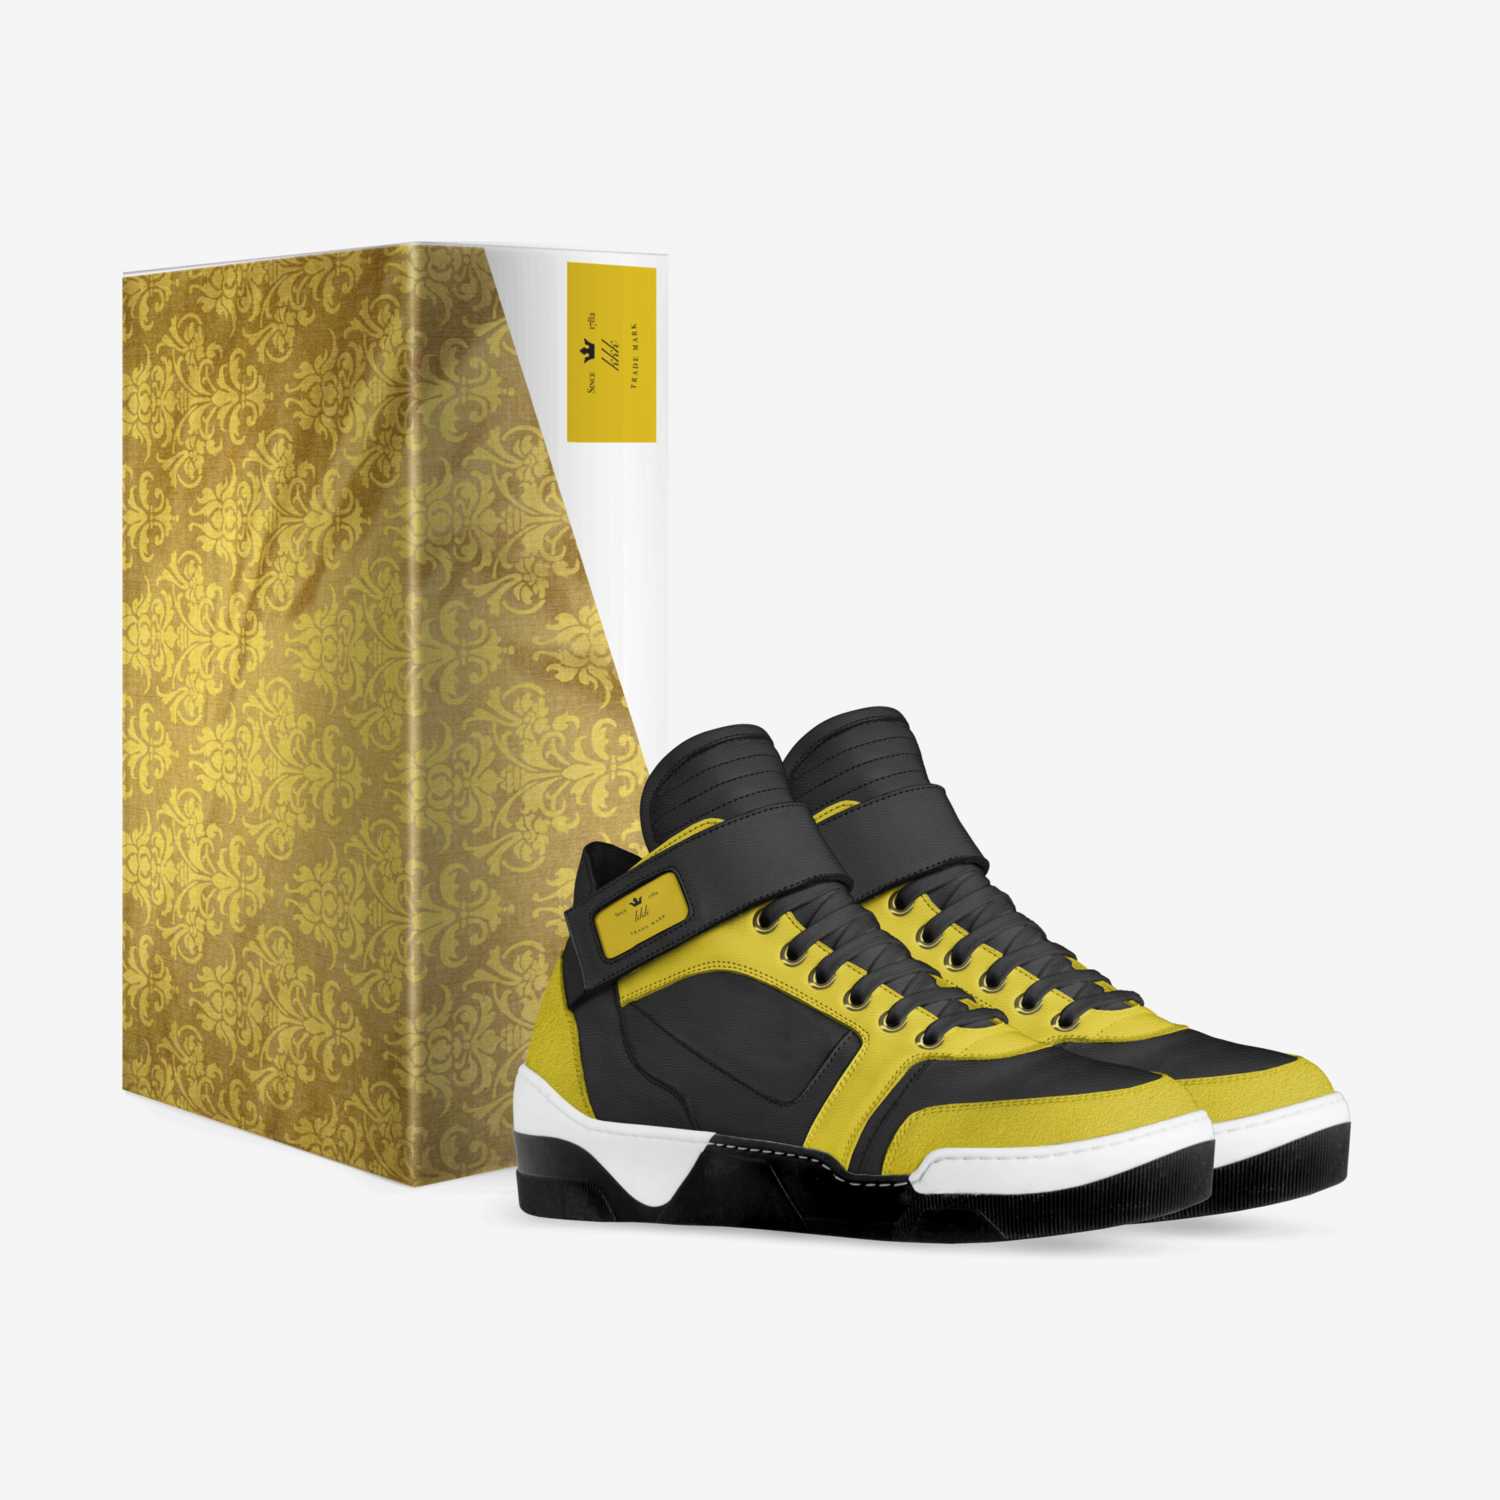 MJ replay custom made in Italy shoes by Tyler Hilpert | Box view